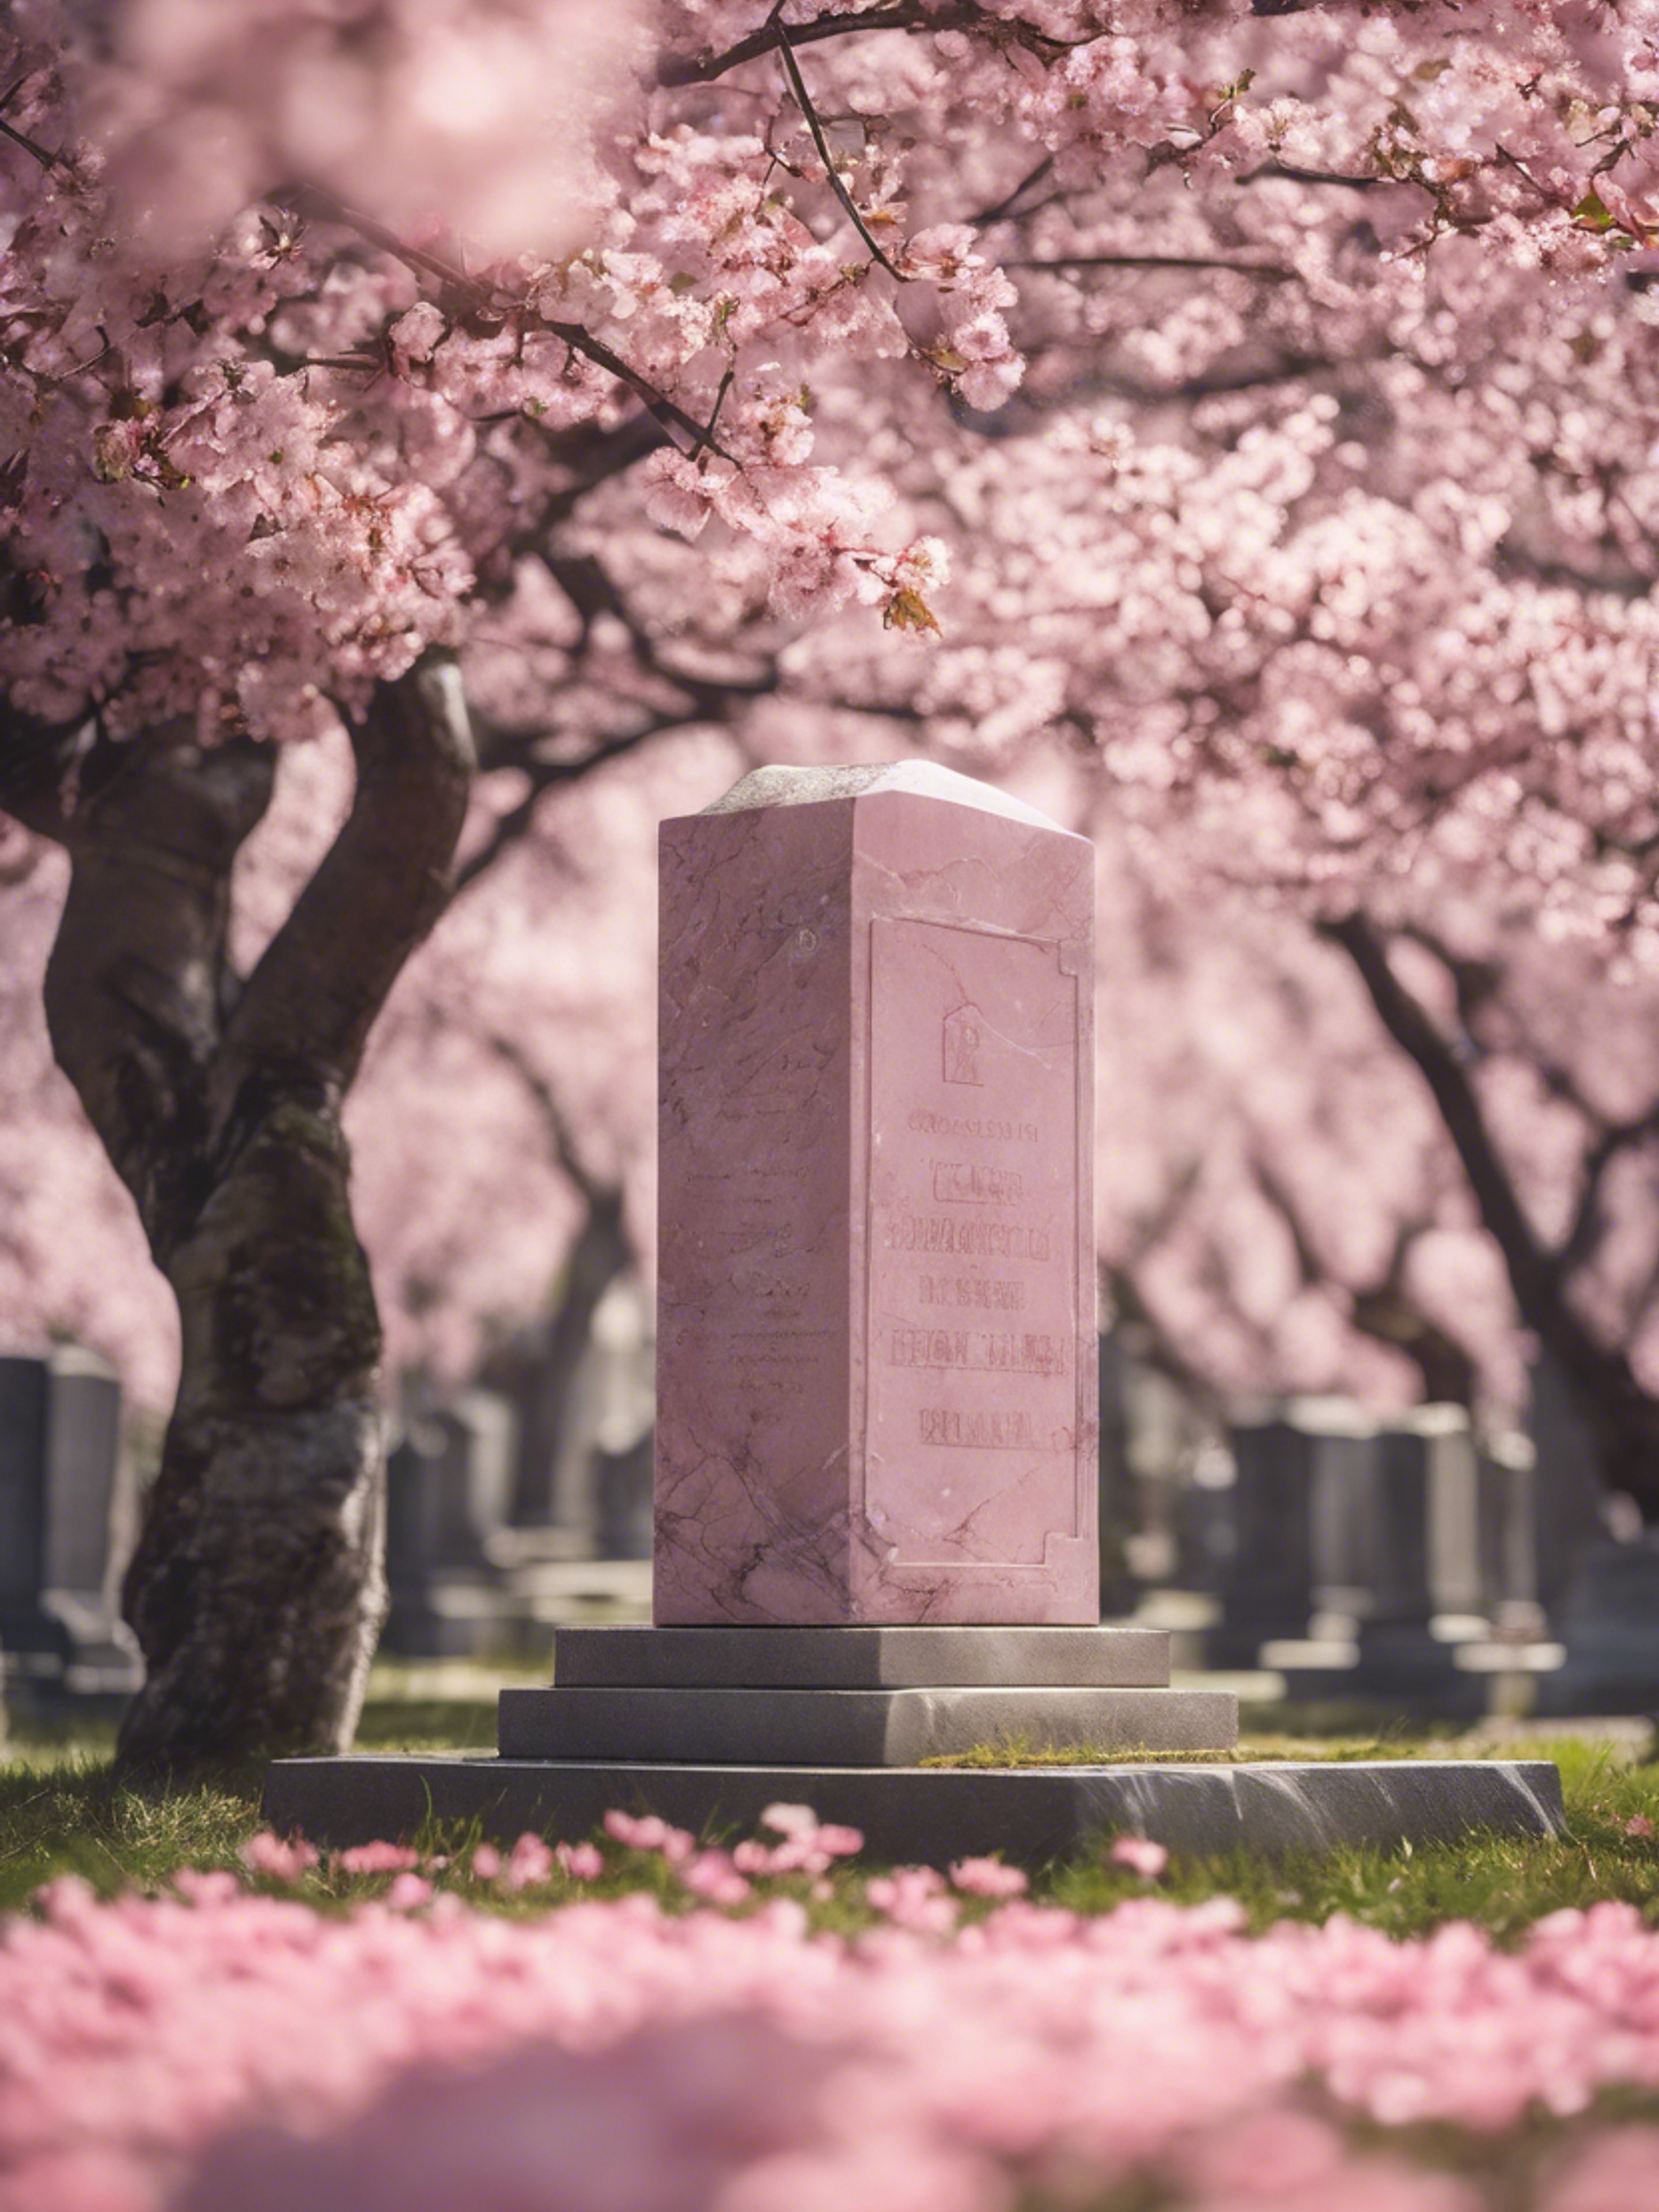 Pink marble headstone surrounded by blooming cherry blossom trees in a tranquil cemetery. Шпалери[6605d21f56504ecfad88]